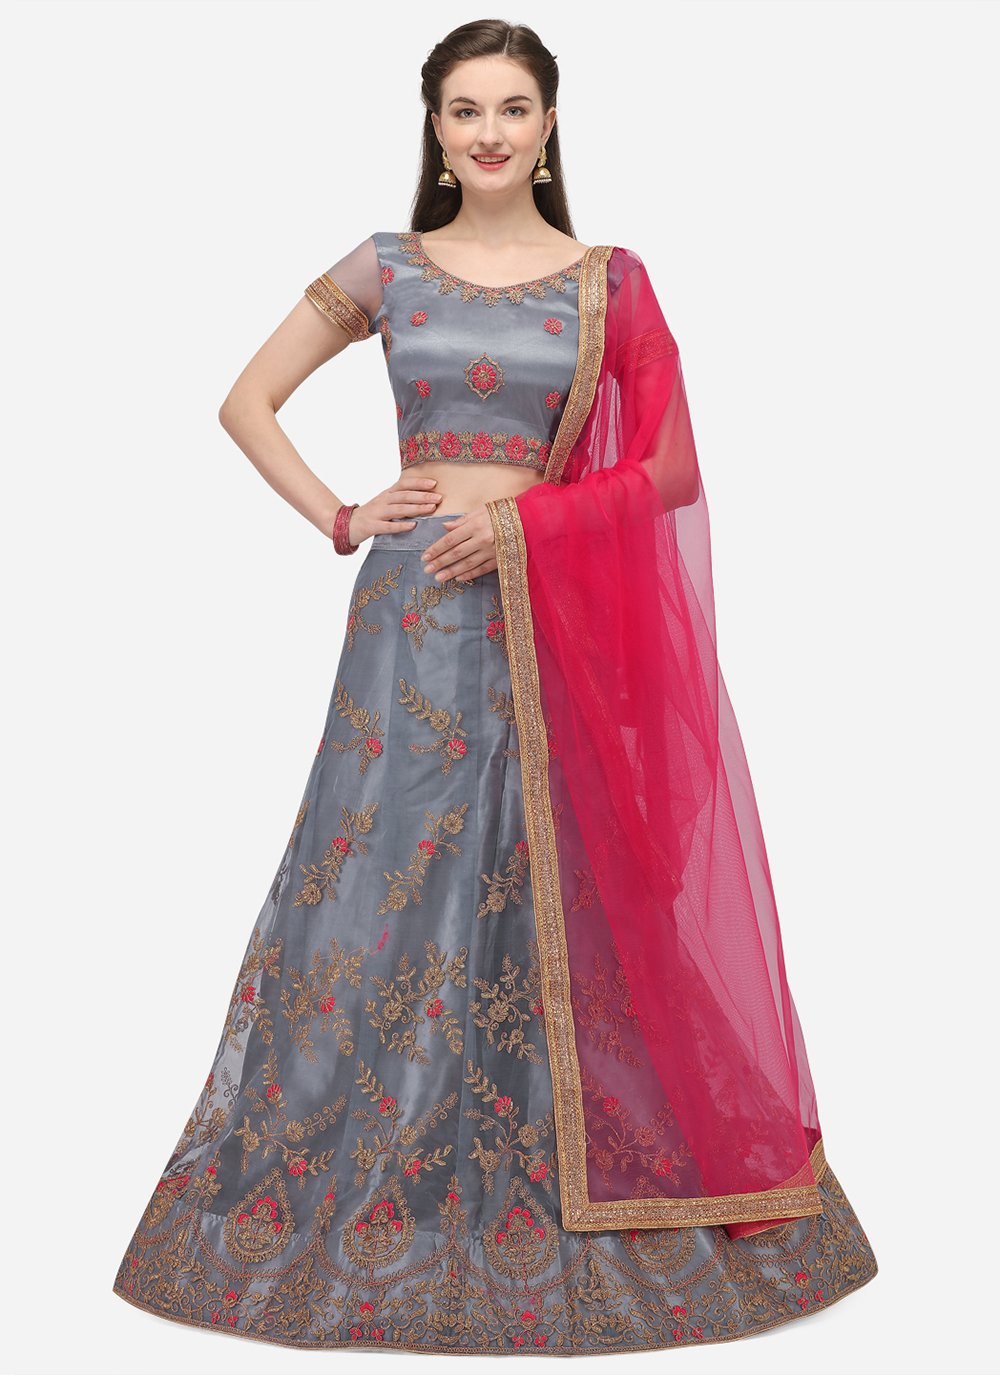 Top More Than 82 Red And Grey Lehenga Super Hot Vn 